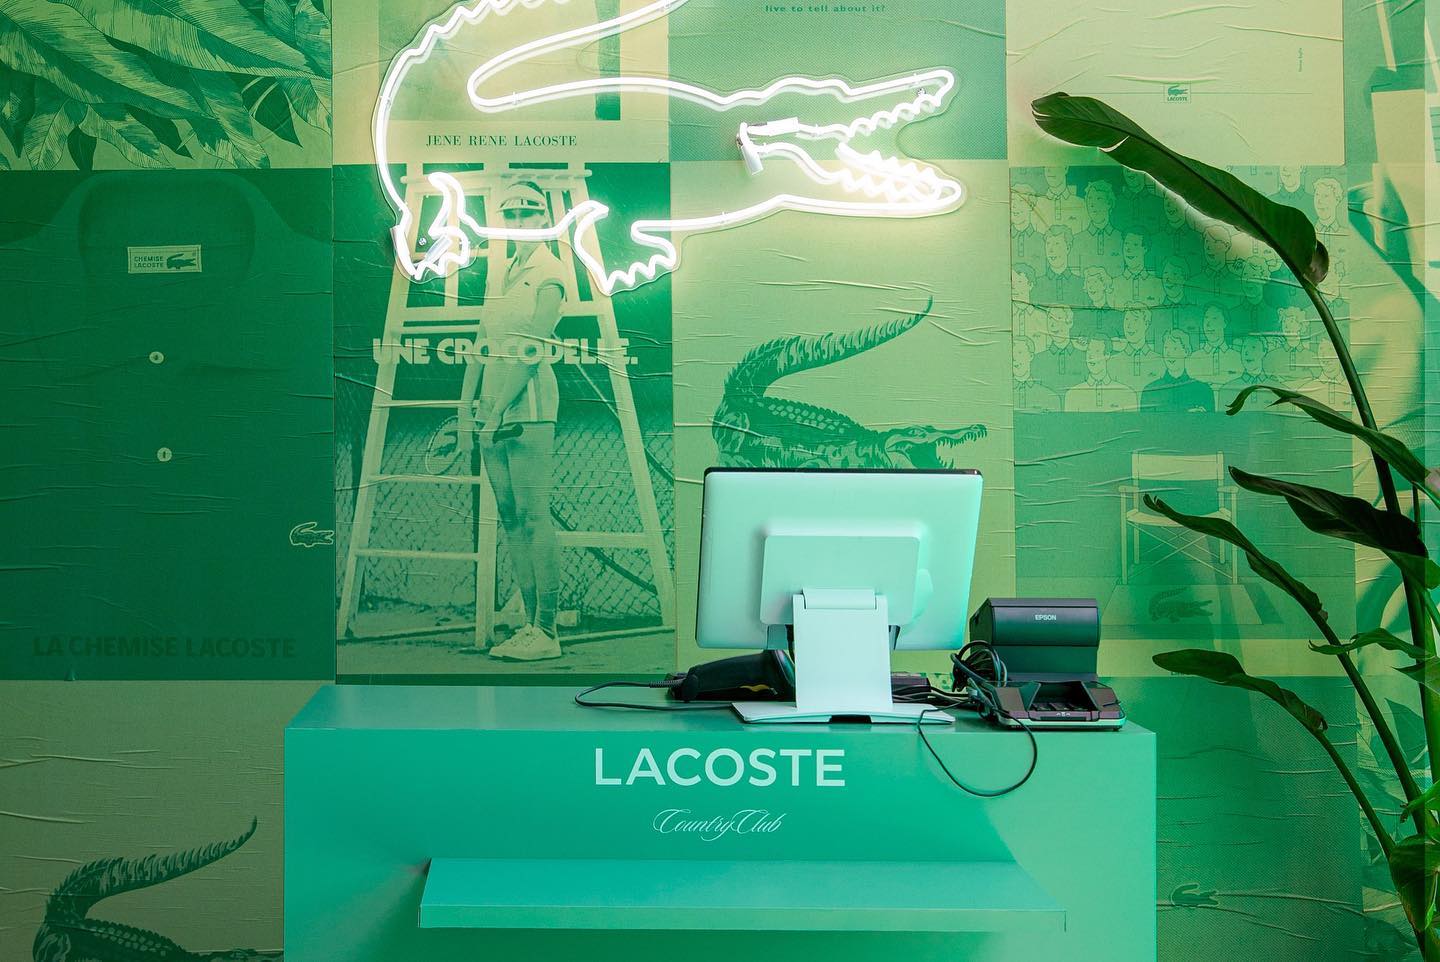 Sprællemand et eller andet sted Sædvanlig Limitless Creative on Twitter: "Lacoste Country Club - Iconic moments and  figures immortalized within the Lacoste brand bring this country club  collection to life. Retail Concept/Design/Build @Lacoste 📍Los Angeles  https://t.co/rq8XshAvGT" / Twitter